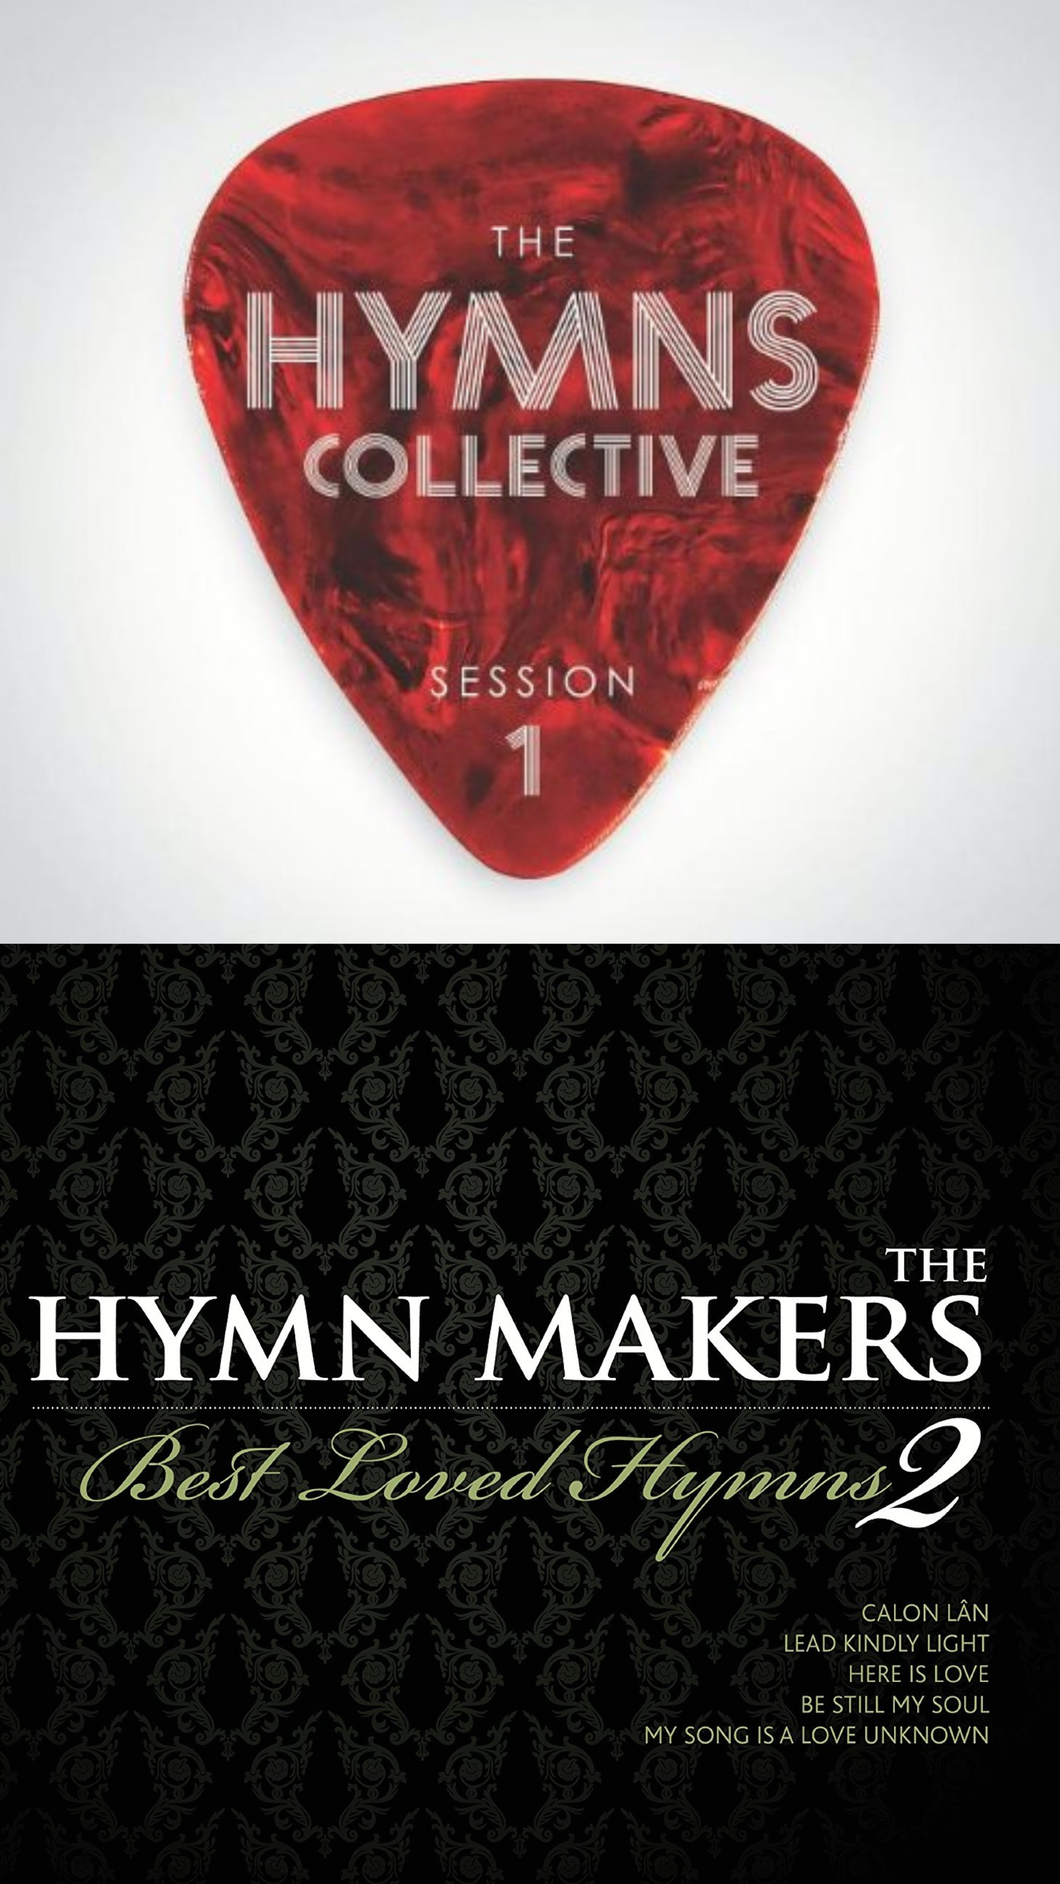 The Hymns Collective Session 1 + The Hymn Makers v2 2CD